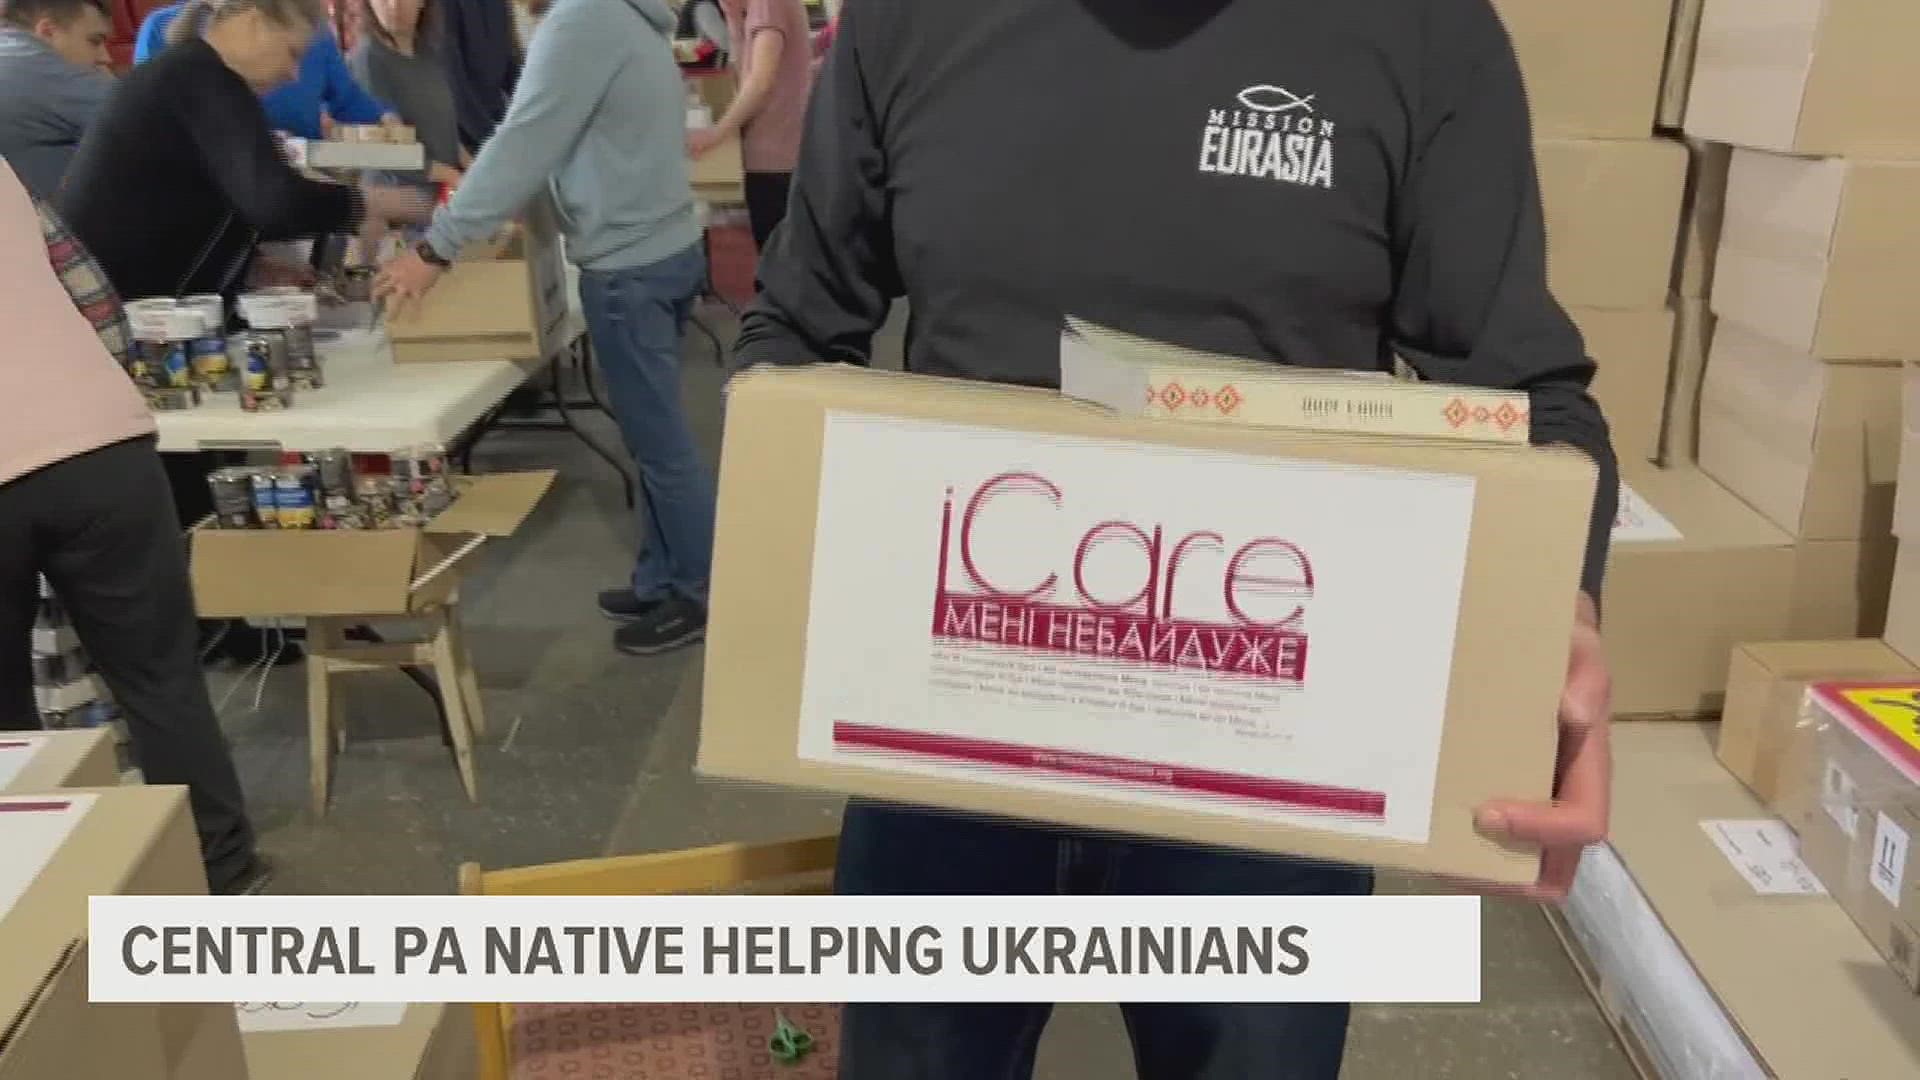 Don Parsons is part of a Ukrainian-Eurasian group called Mission Eurasia, which is mobilizing thousands of volunteers.